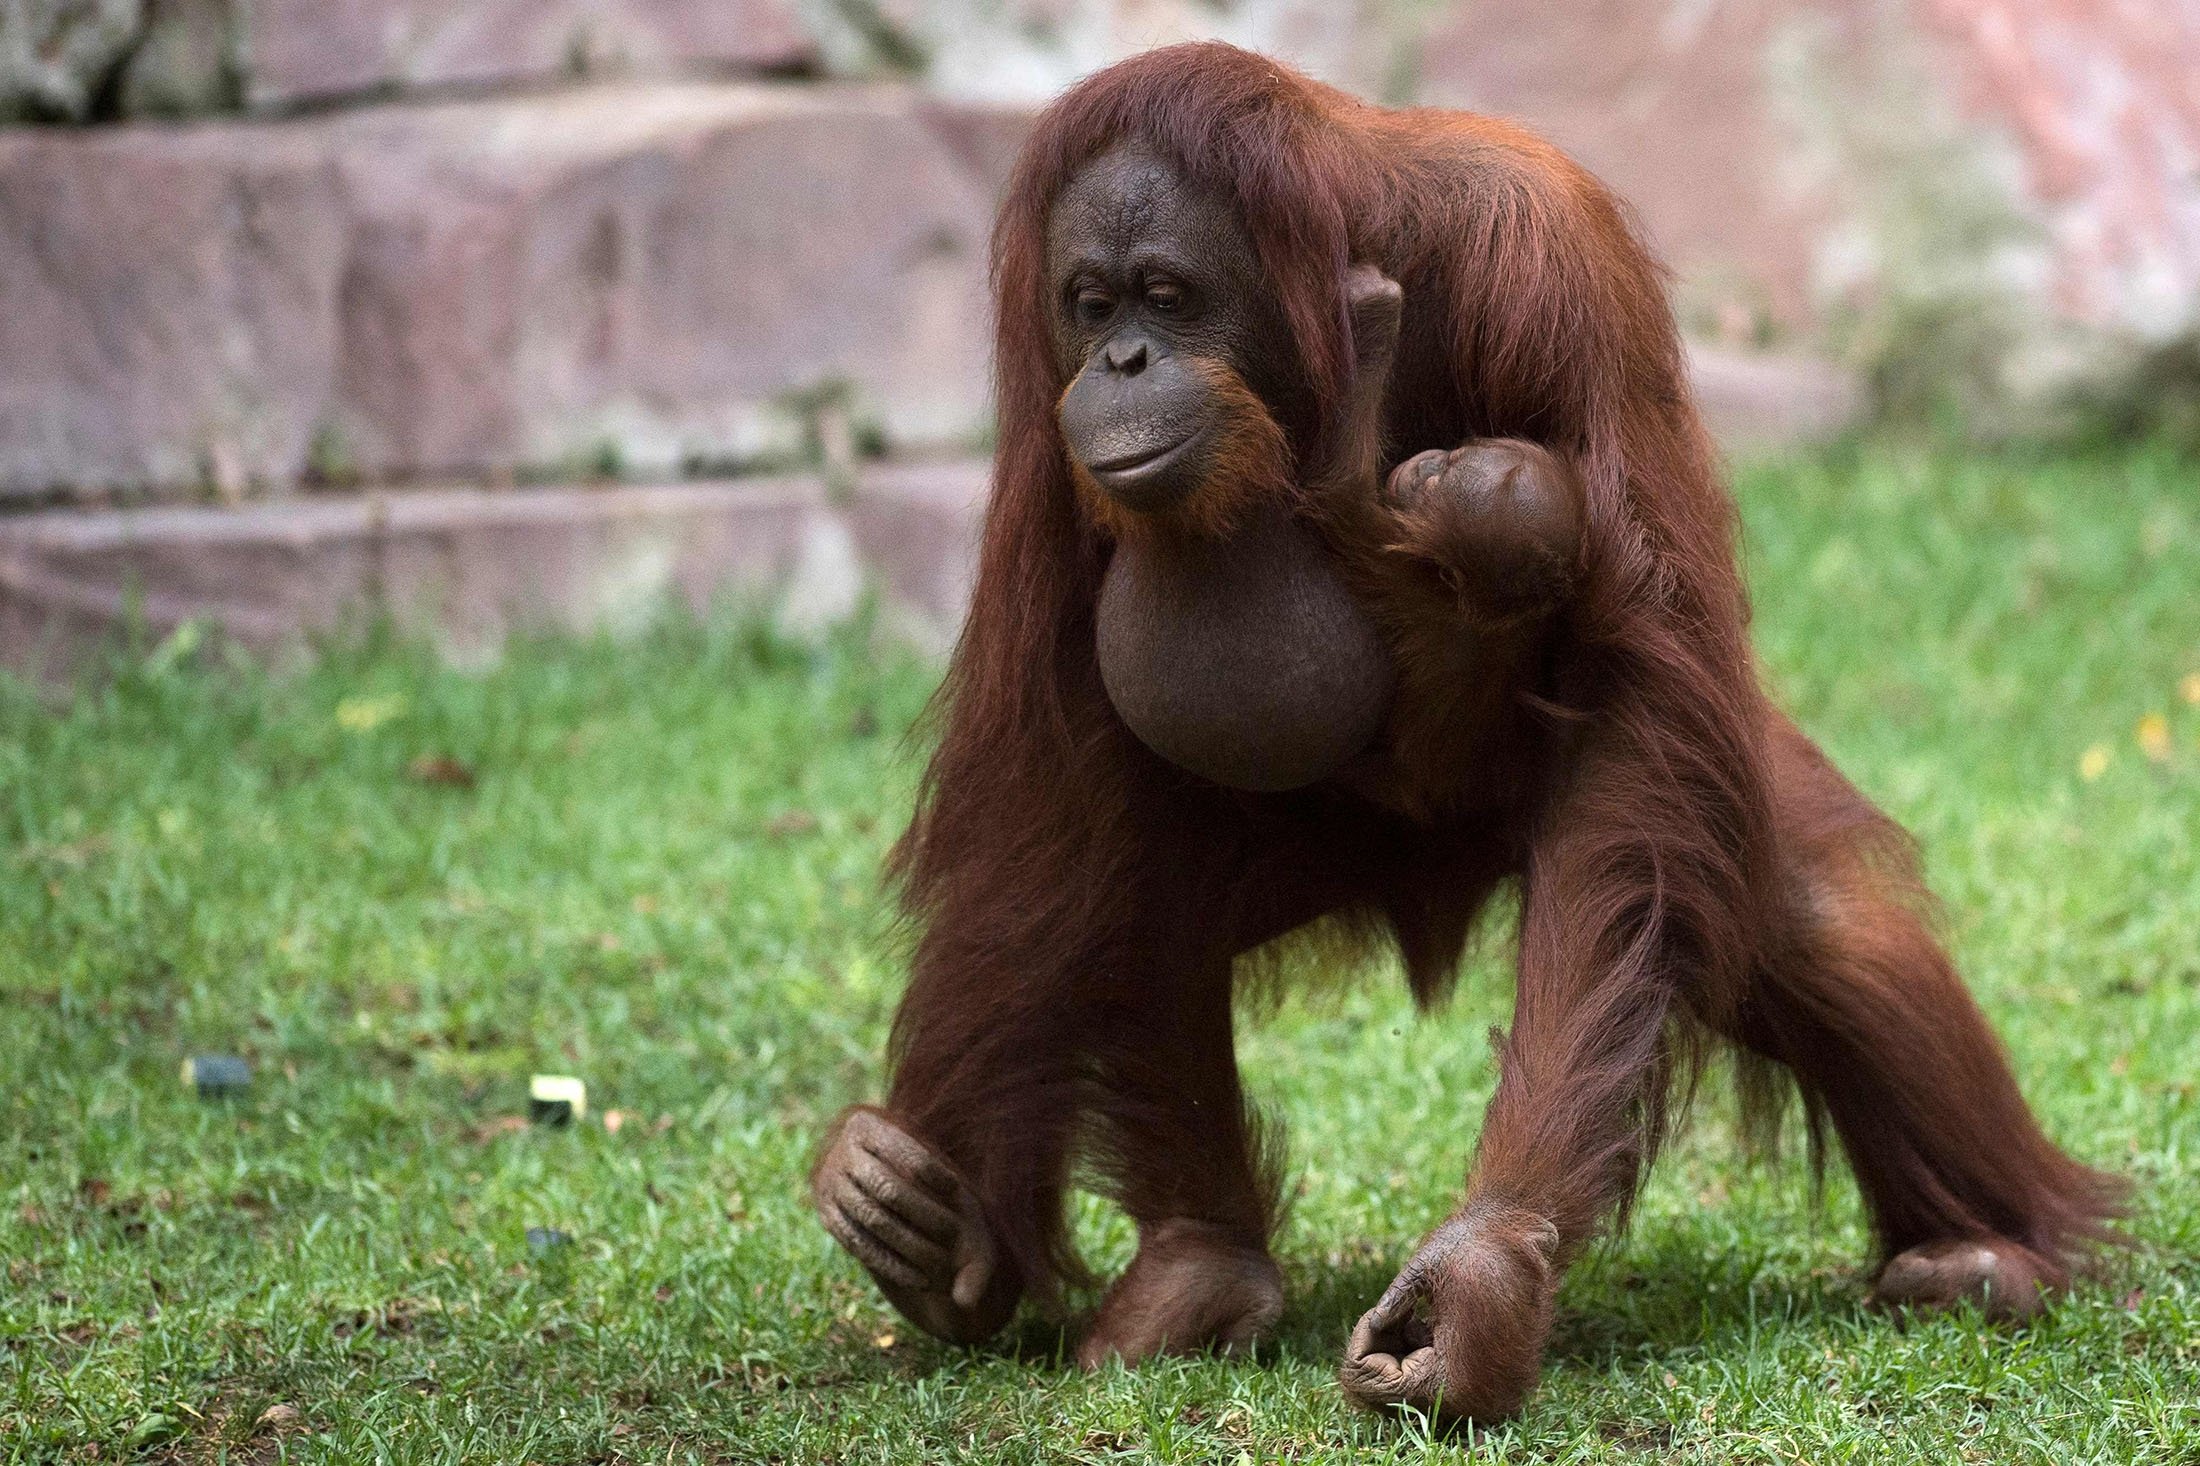 A Bornean orangutan called Suli holds her newborn baby at their enclosure at the Bioparc zoological park in Fuengirola, Spain, Aug. 12, 2021. (AFP Photo)